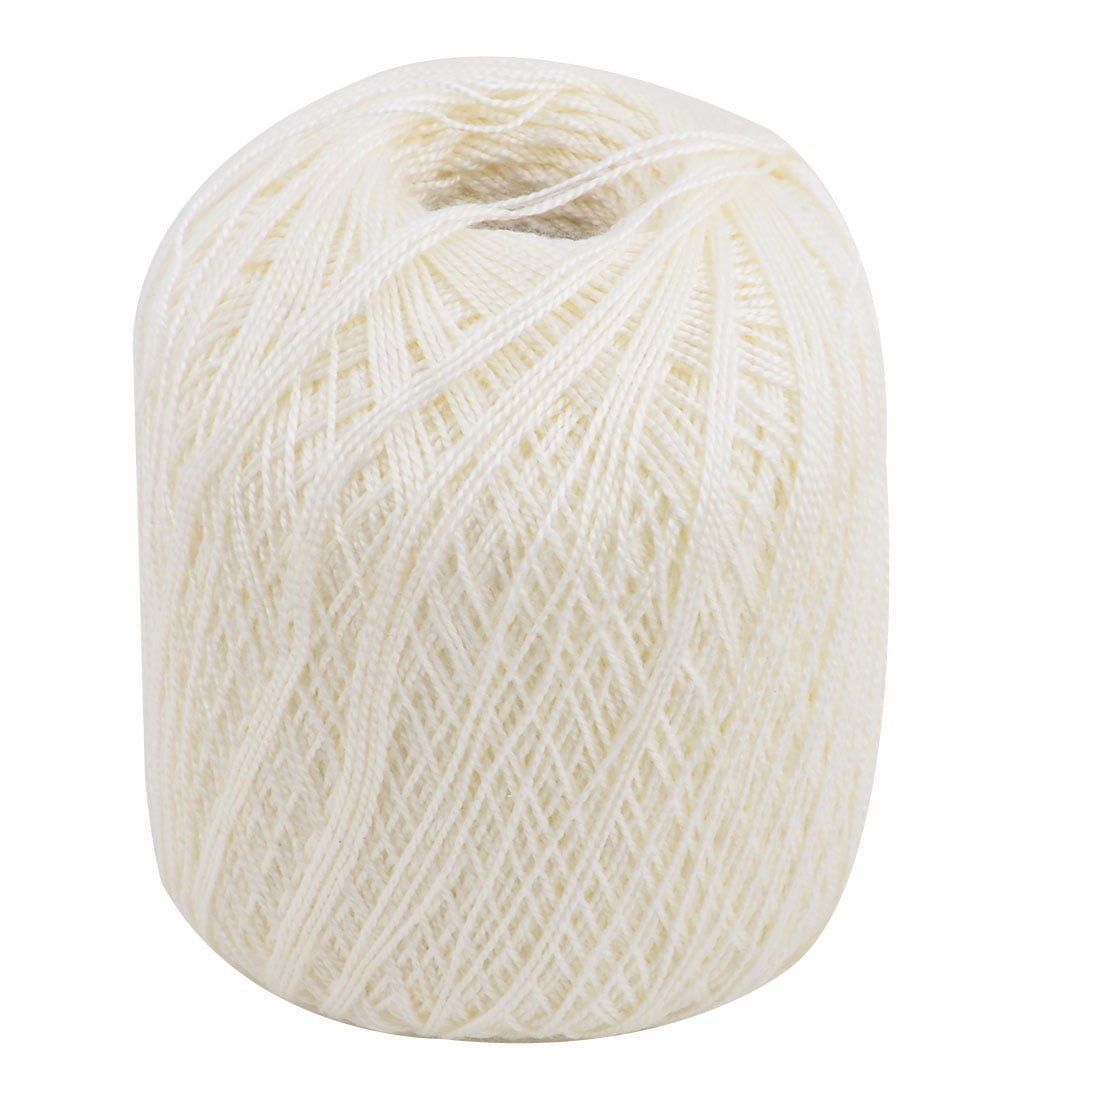 Pacon Cotton 4-Ply Heavy Warp And Weft Yarn Cone 800 Yd.Natural Creamy White 